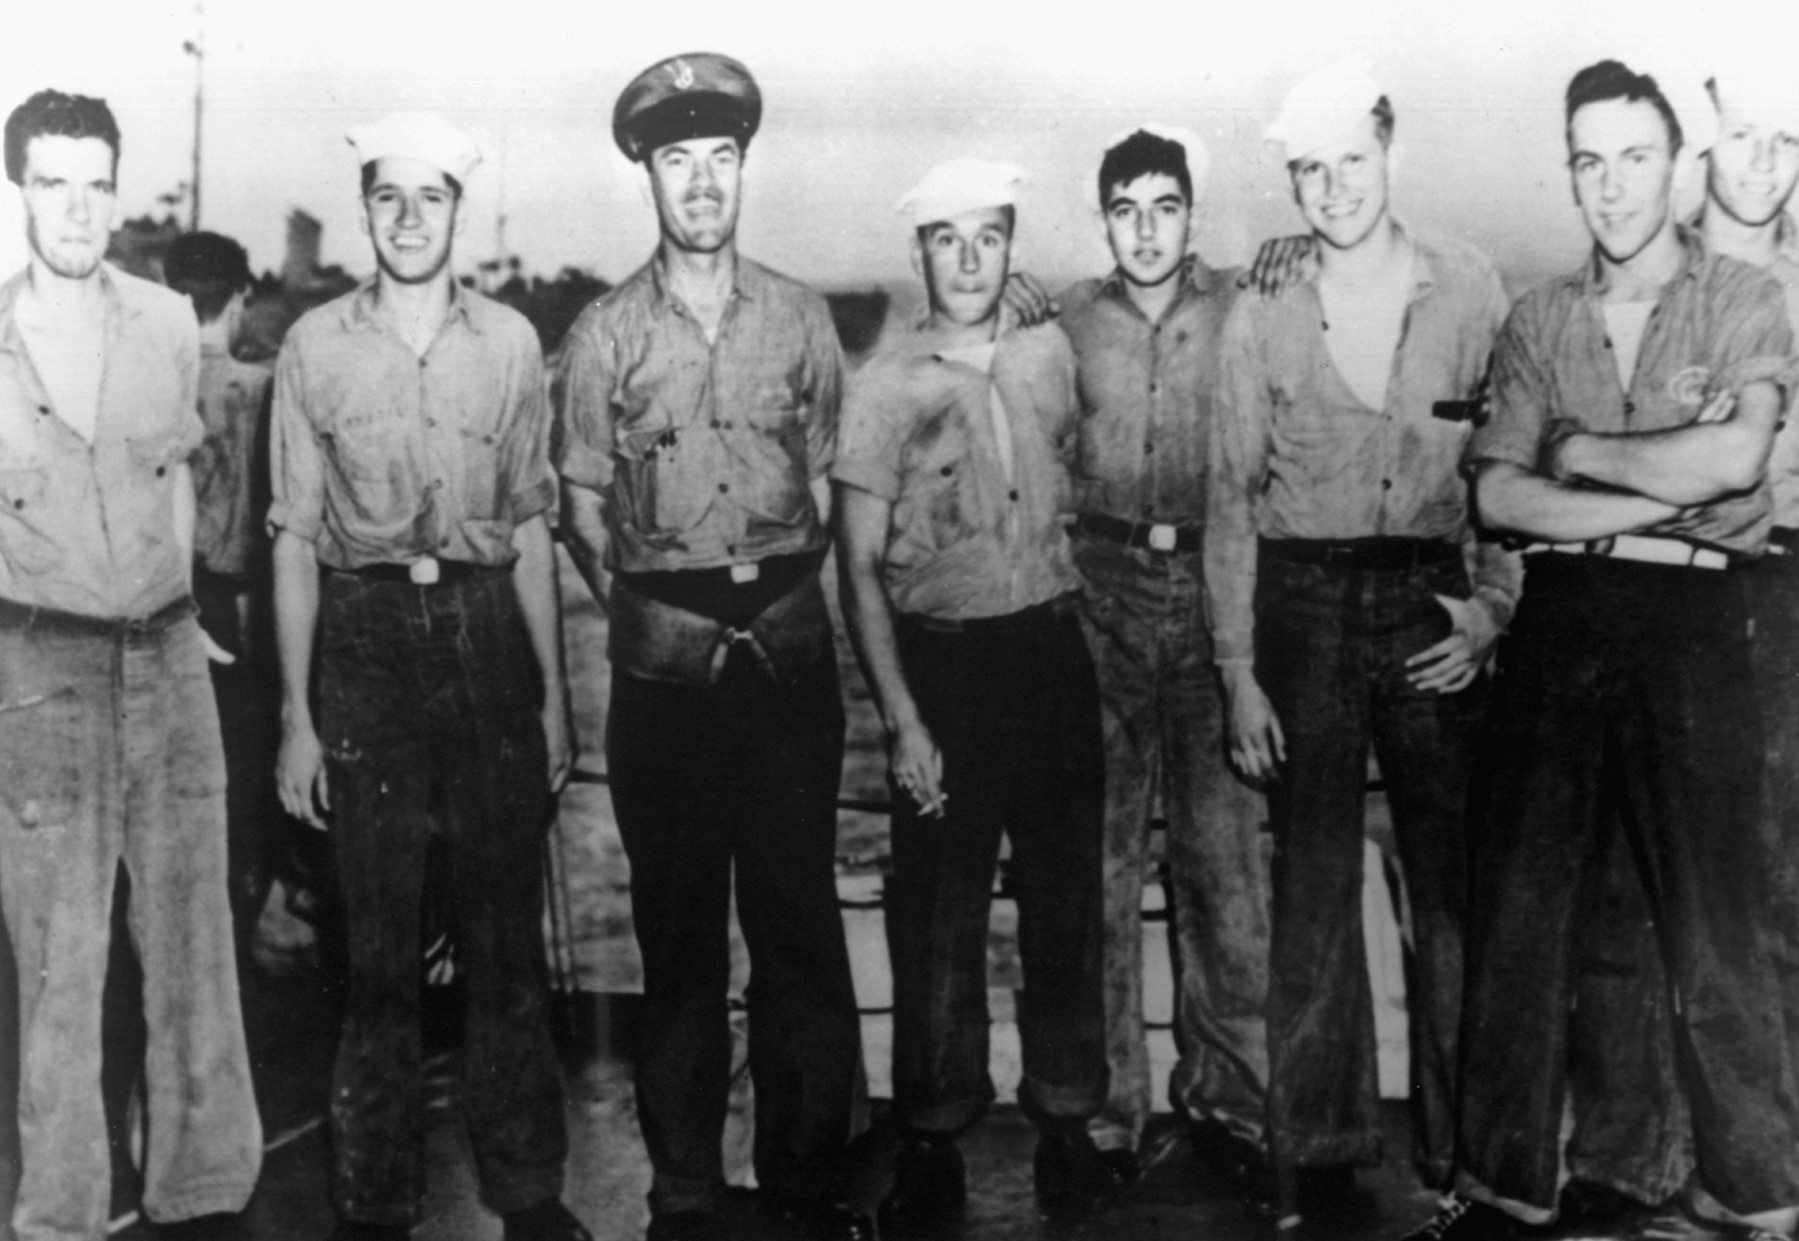 Crewmen of the destroyer escort Pillsbury are shown celebrating the capture of the submarine U-505. These men were members of the first boarding party to reach the German vessel.